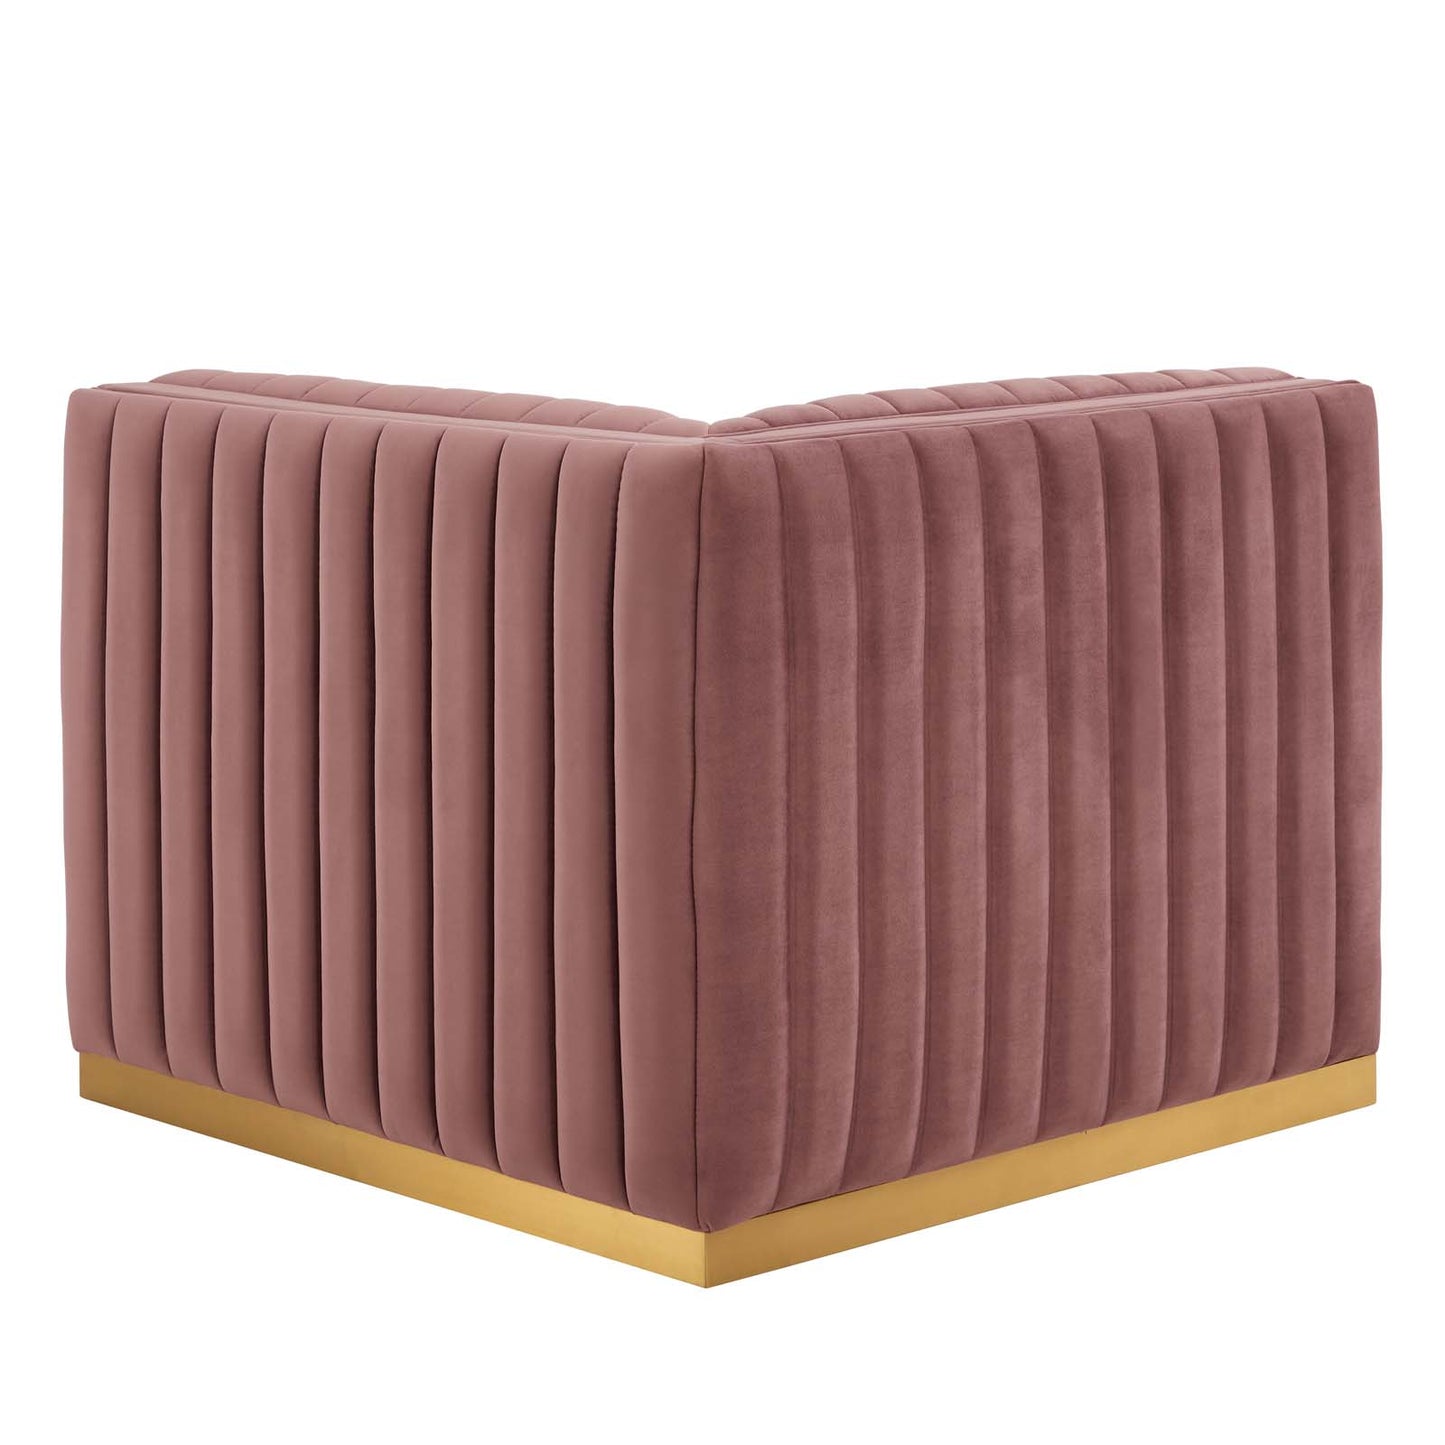 Conjure Channel Tufted Performance Velvet Right Corner Chair Gold Dusty Rose EEI-5506-GLD-DUS